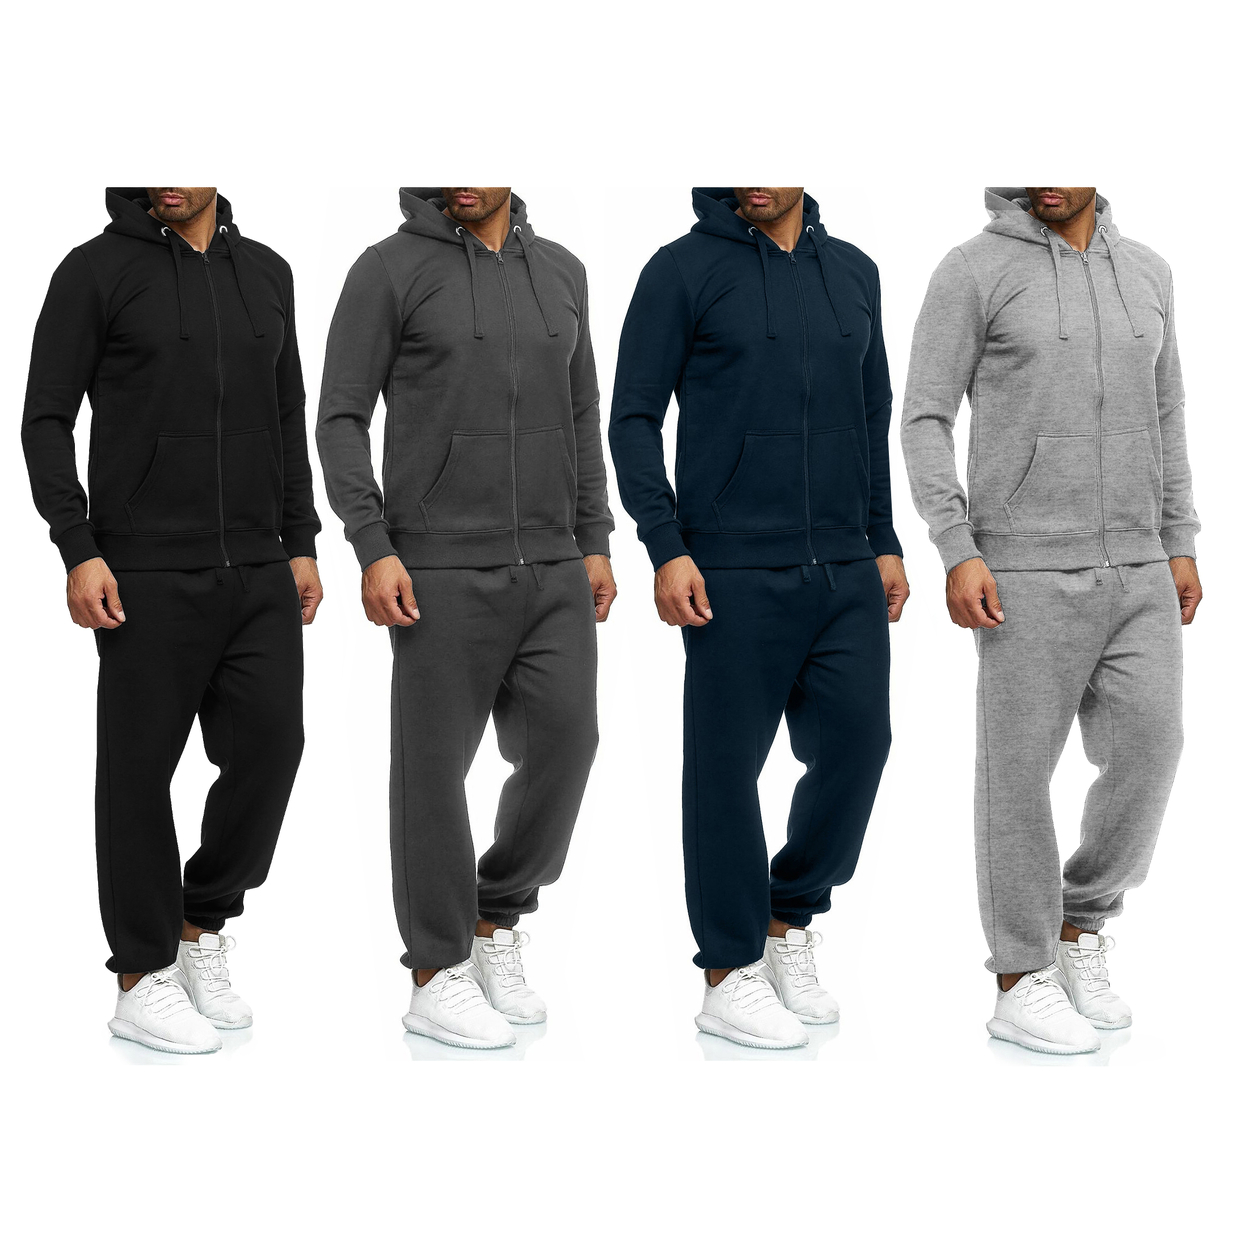 Multi-Pack: Men's Casual Big & Tall Athletic Active Winter Warm Fleece Lined Full Zip Tracksuit Jogger Set - Navy, 2-pack, Xx-large